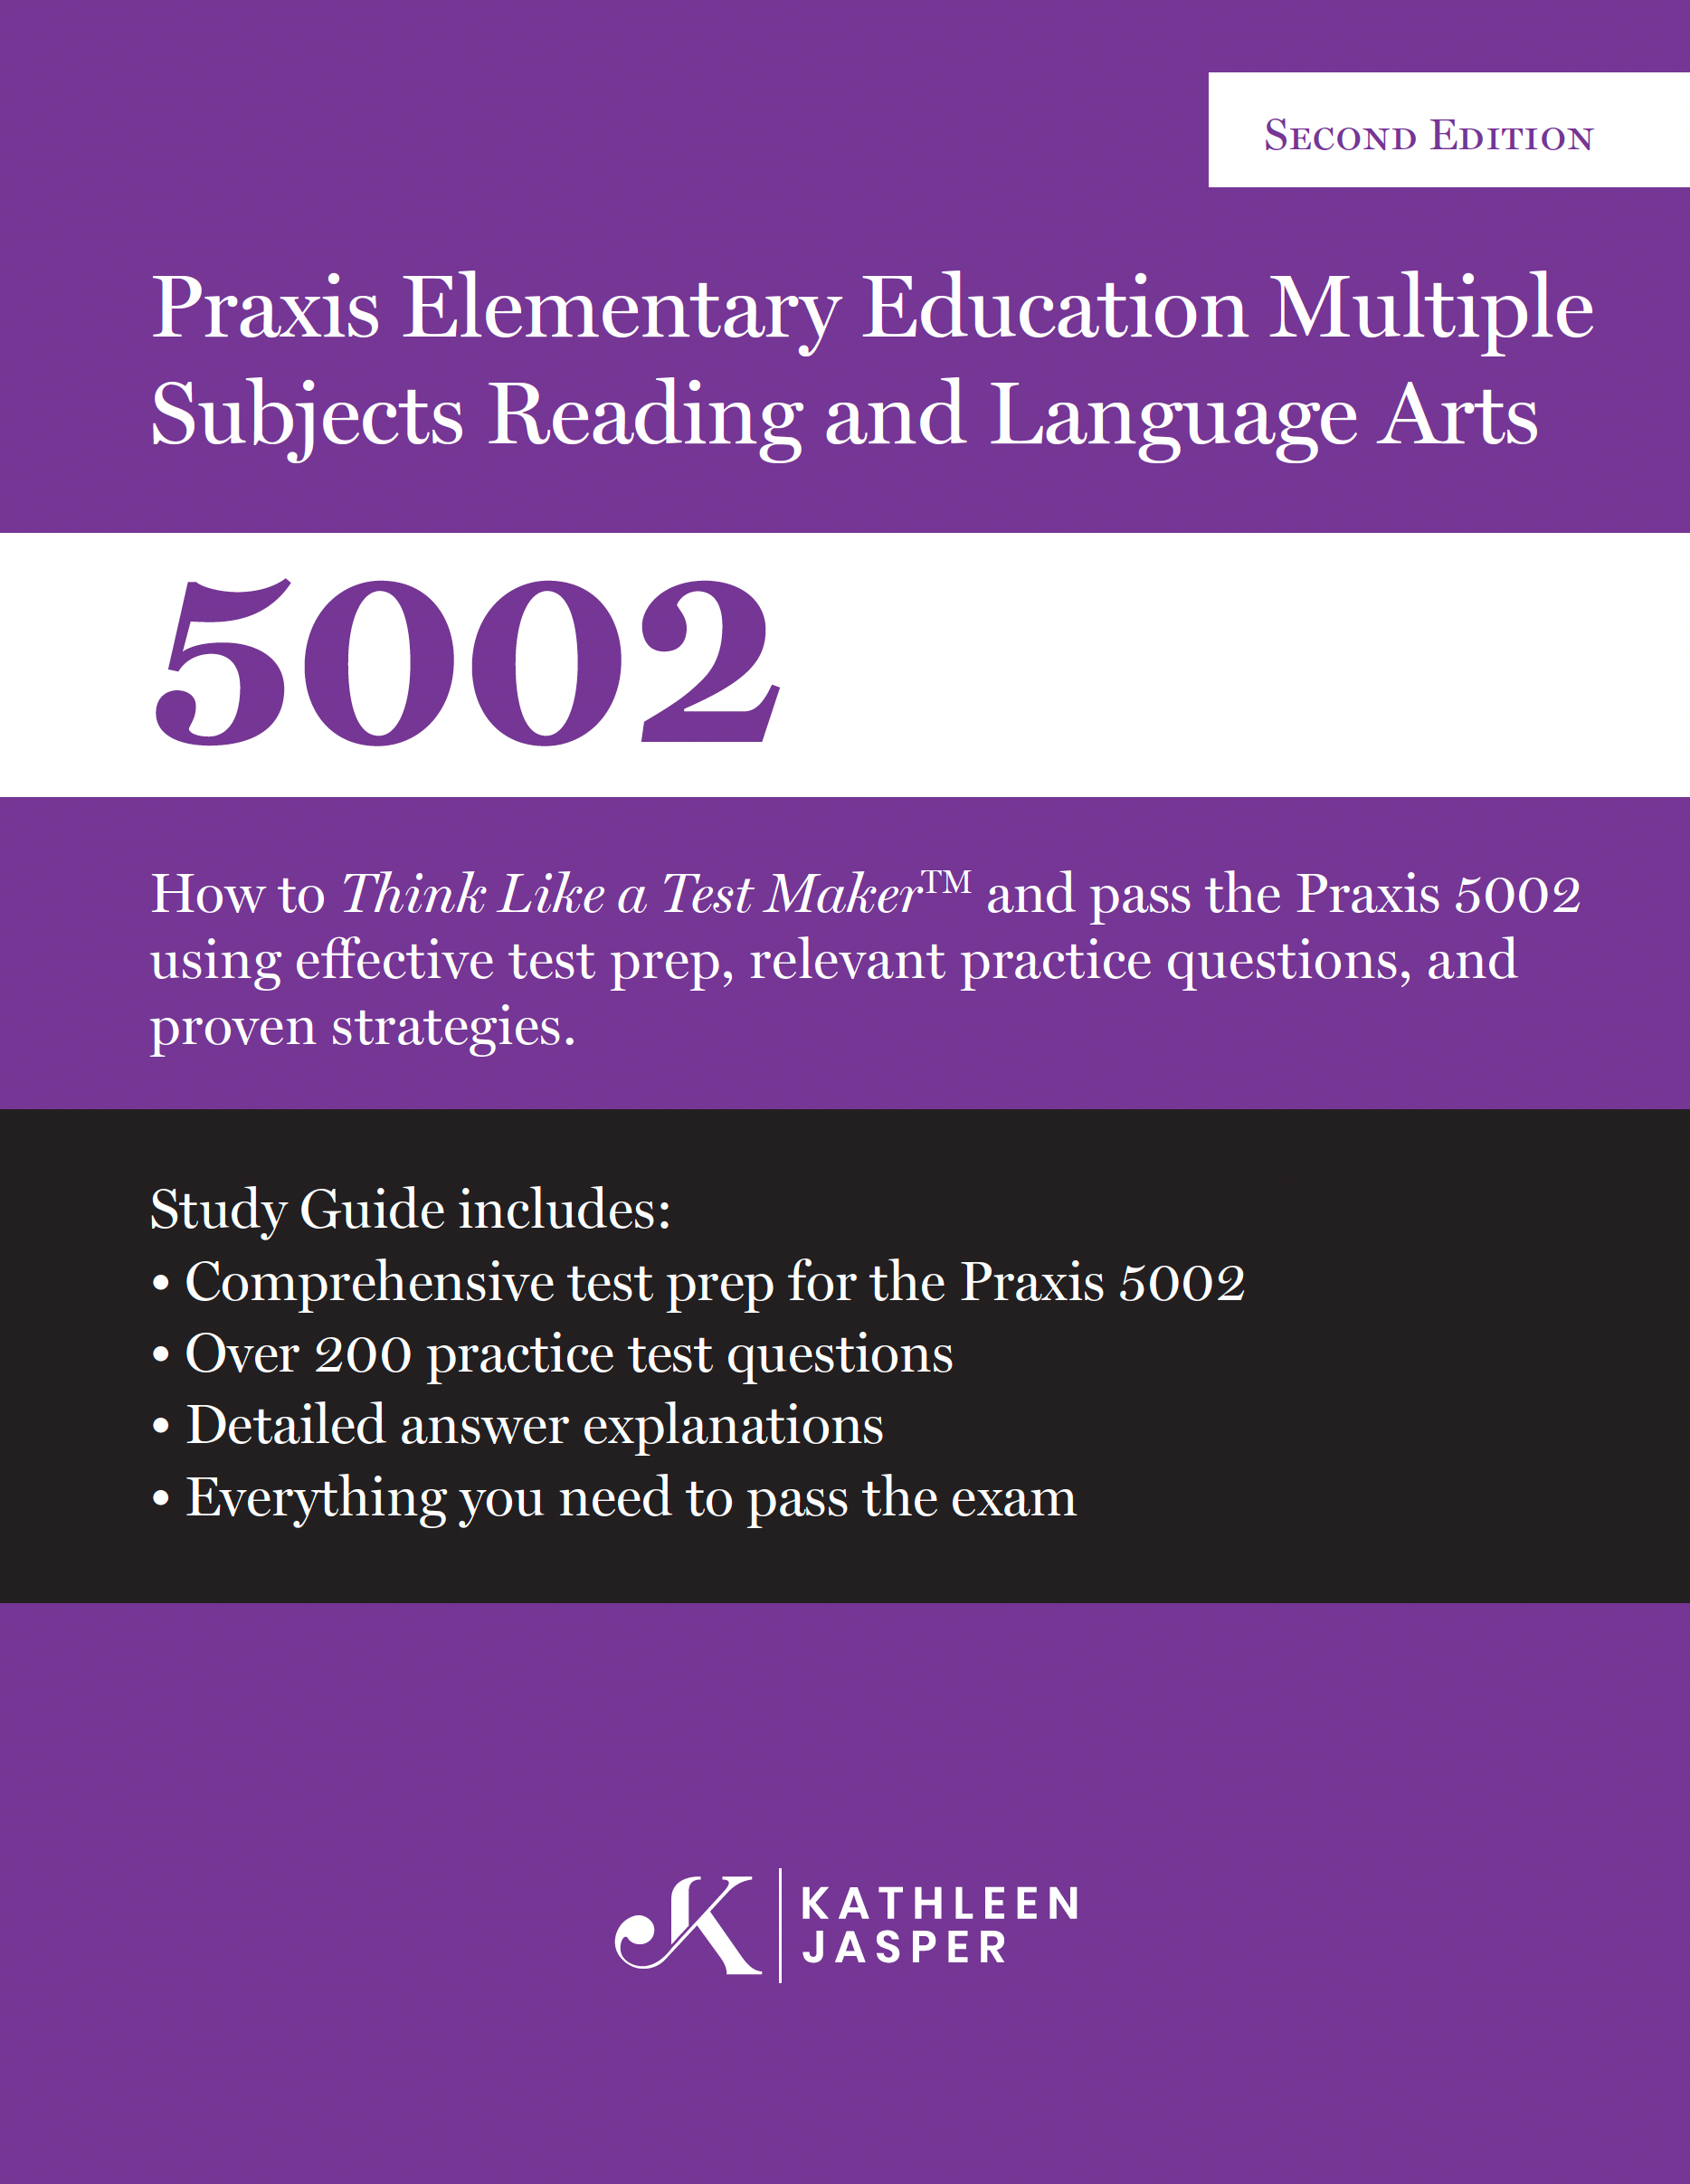 Praxis II Elementary Education: 5002 Language Arts and Reading Digital Study Guide (Second Edition)